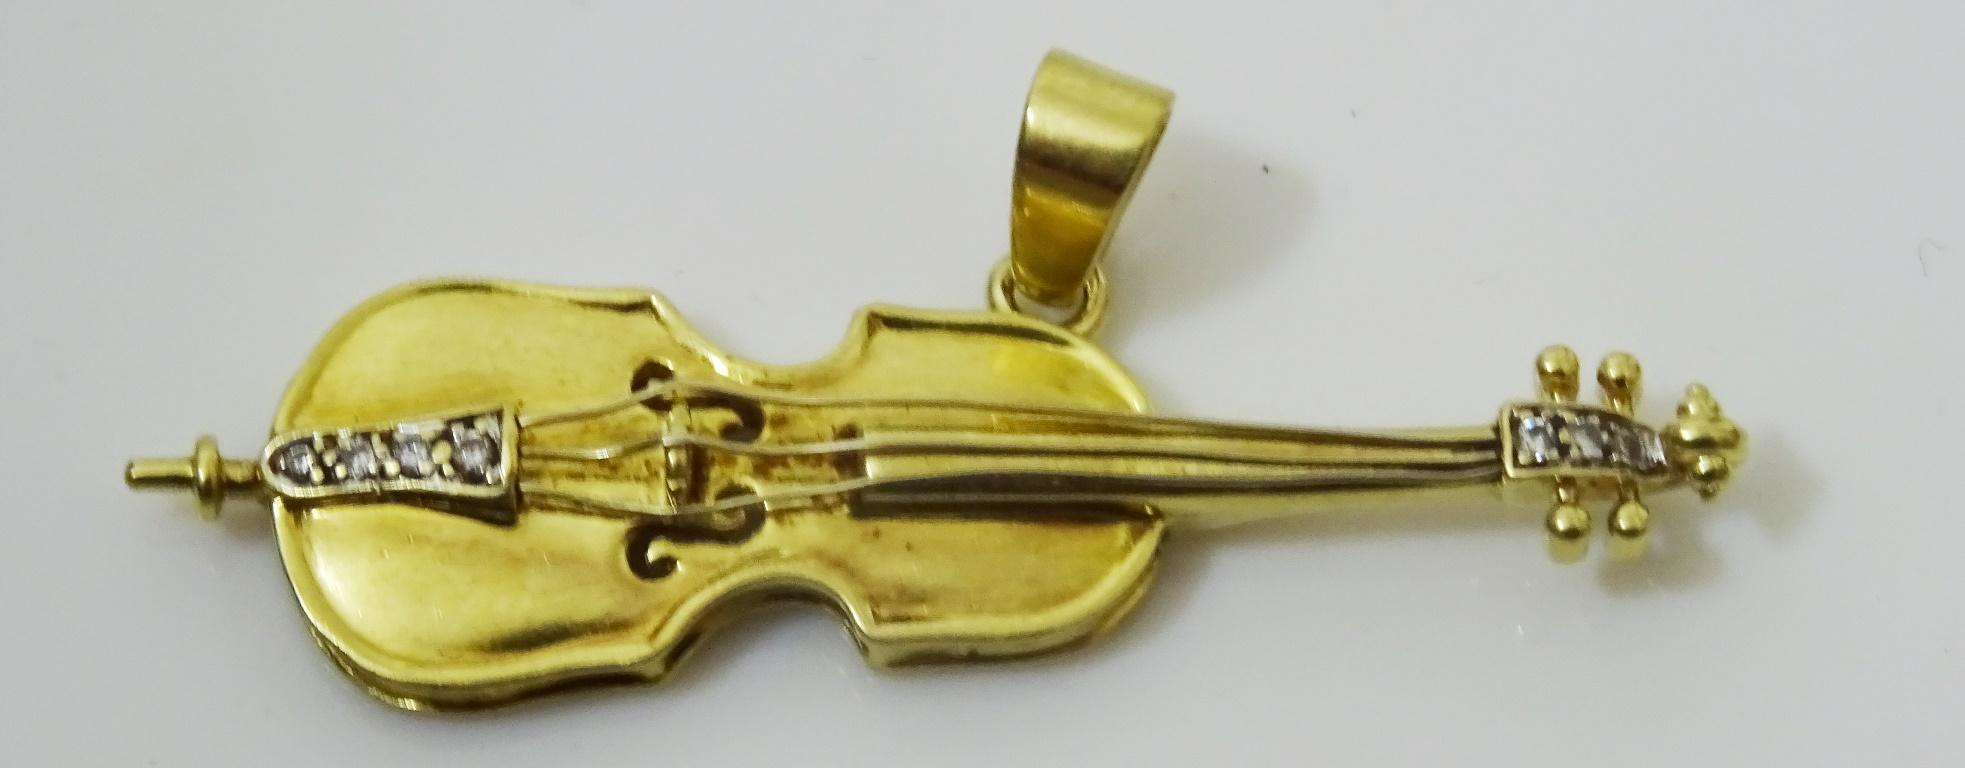 
A Unique Pendant of a Cello made in Acid tested 18 karat Gold and set with 5 Diamonds.
The Details of the instrument are precise.
It is set with 5 one point Diamonds 3 on the bottom and two on the top.
1 7/8 inches long - 52 mm
3/8 of an inch wide